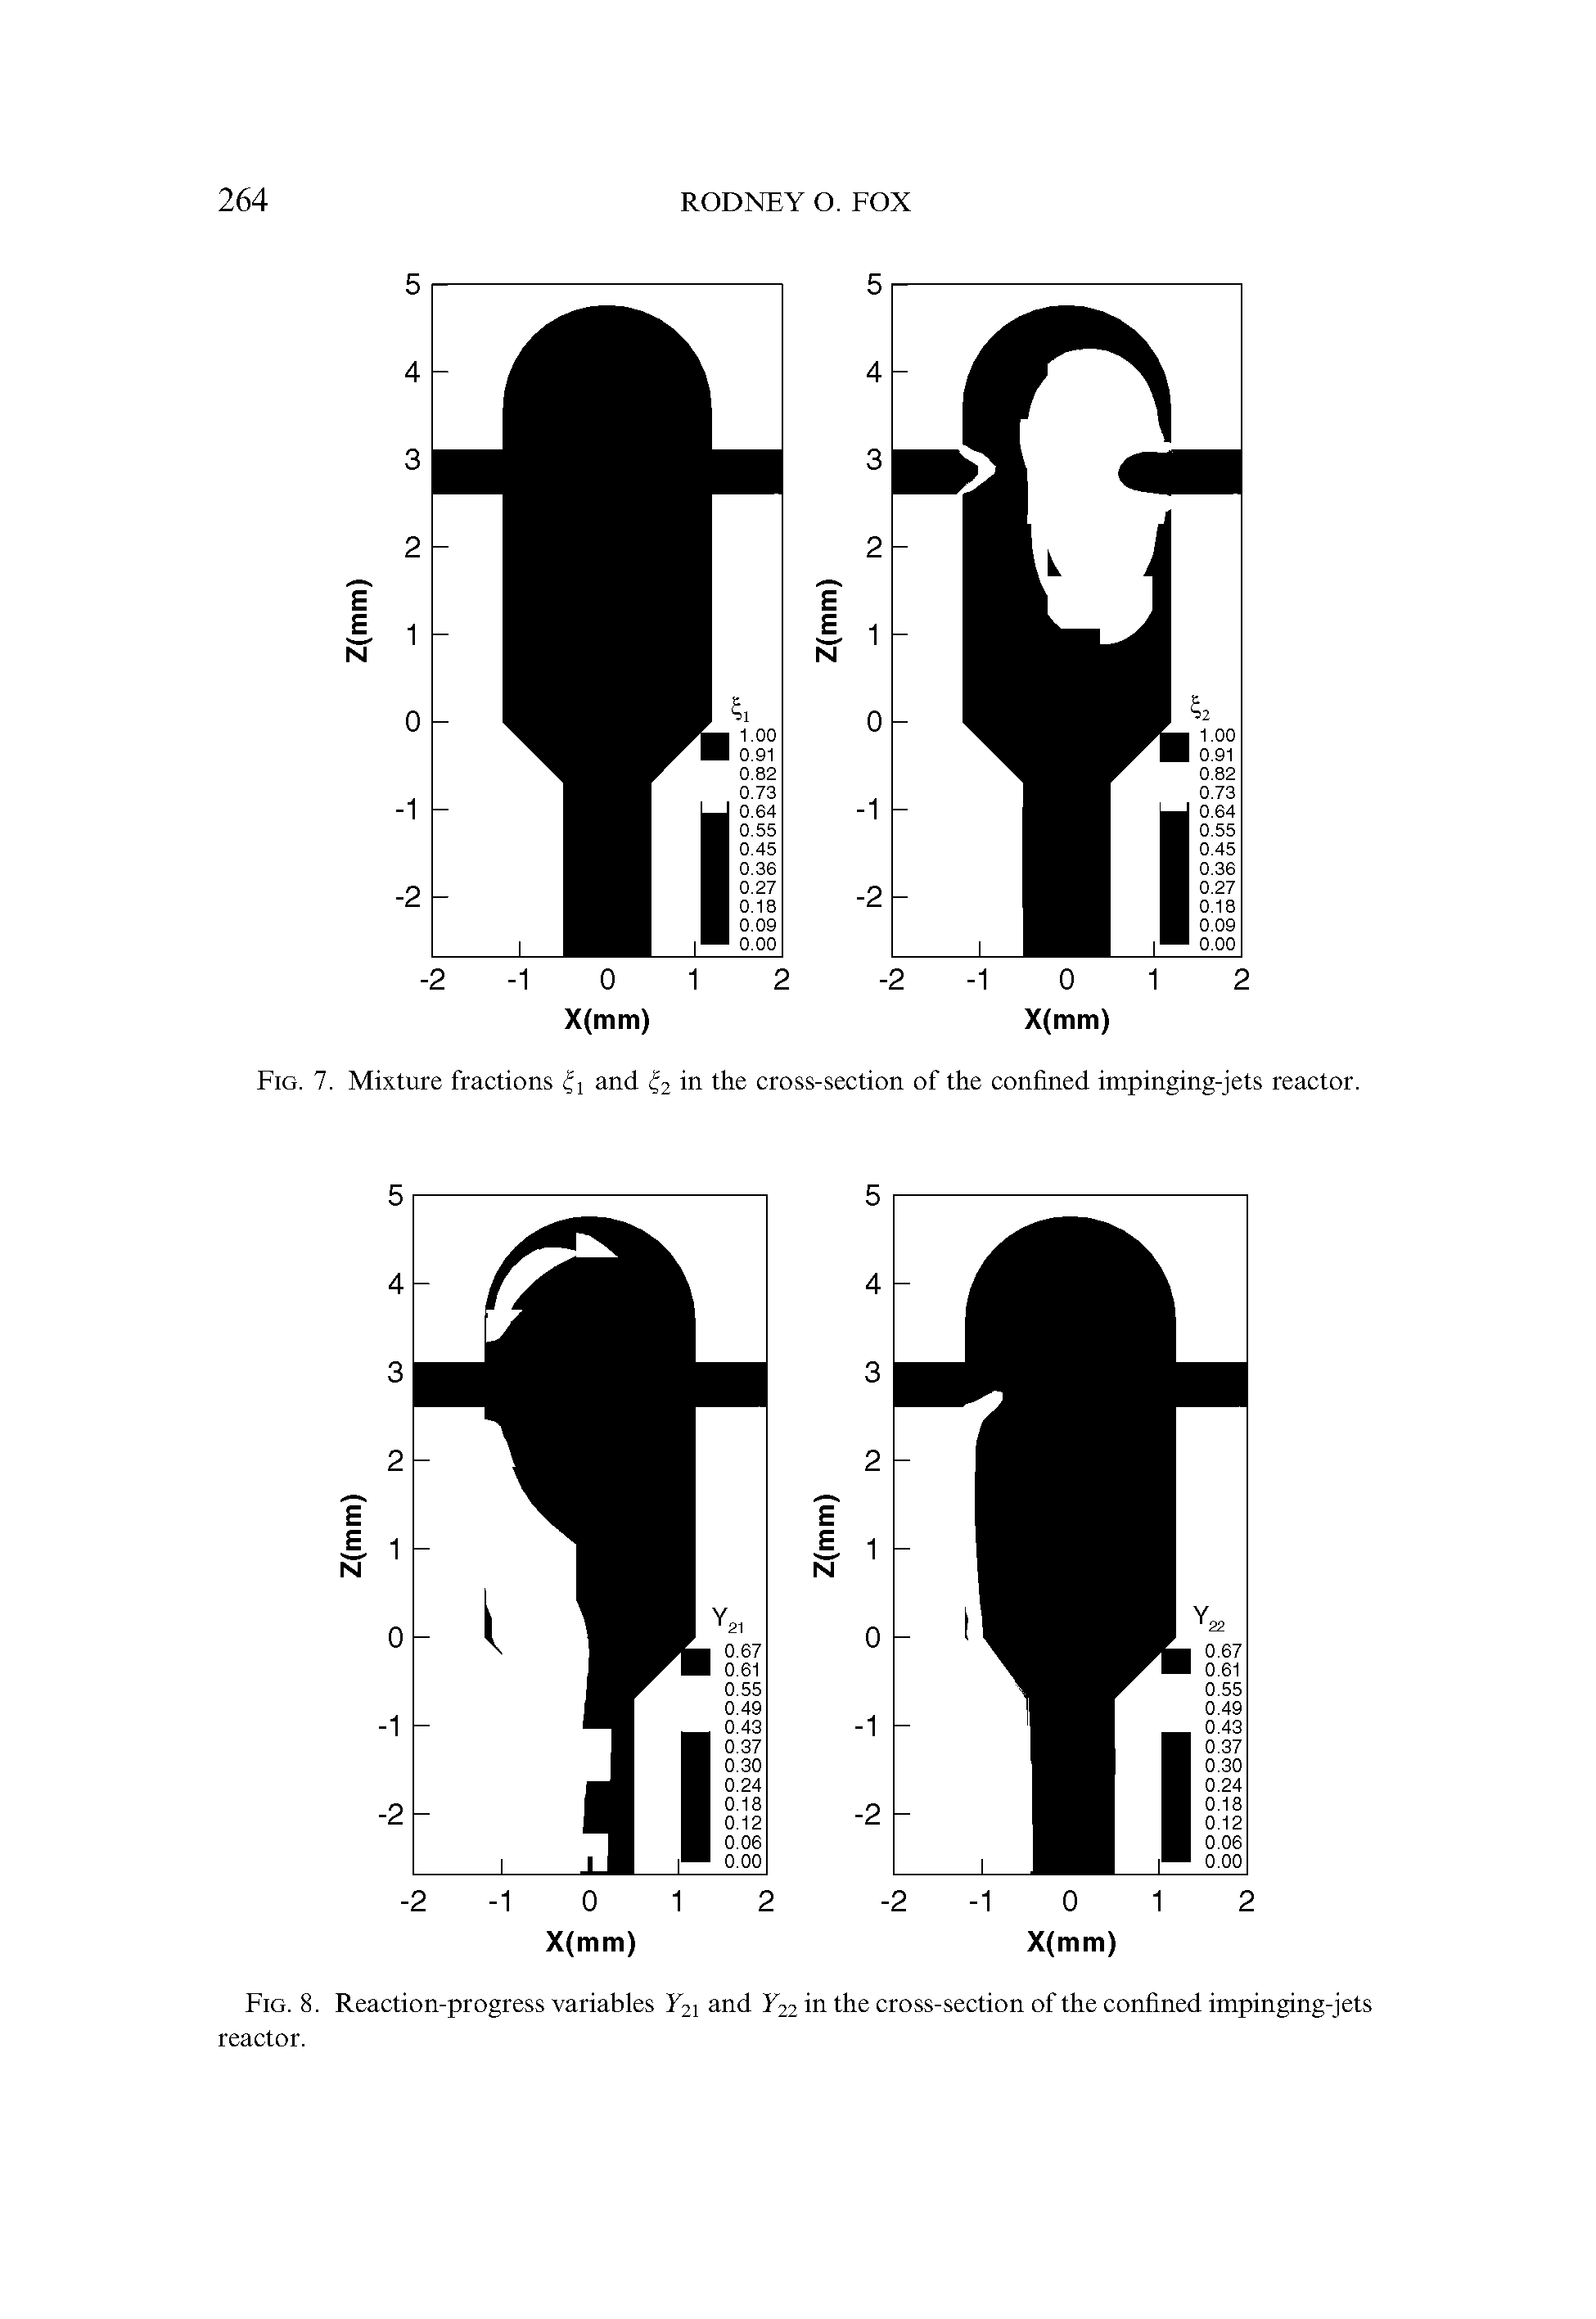 Fig. 8. Reaction-progress variables F21 and F22 in the cross-section of the confined impinging-jets reactor.